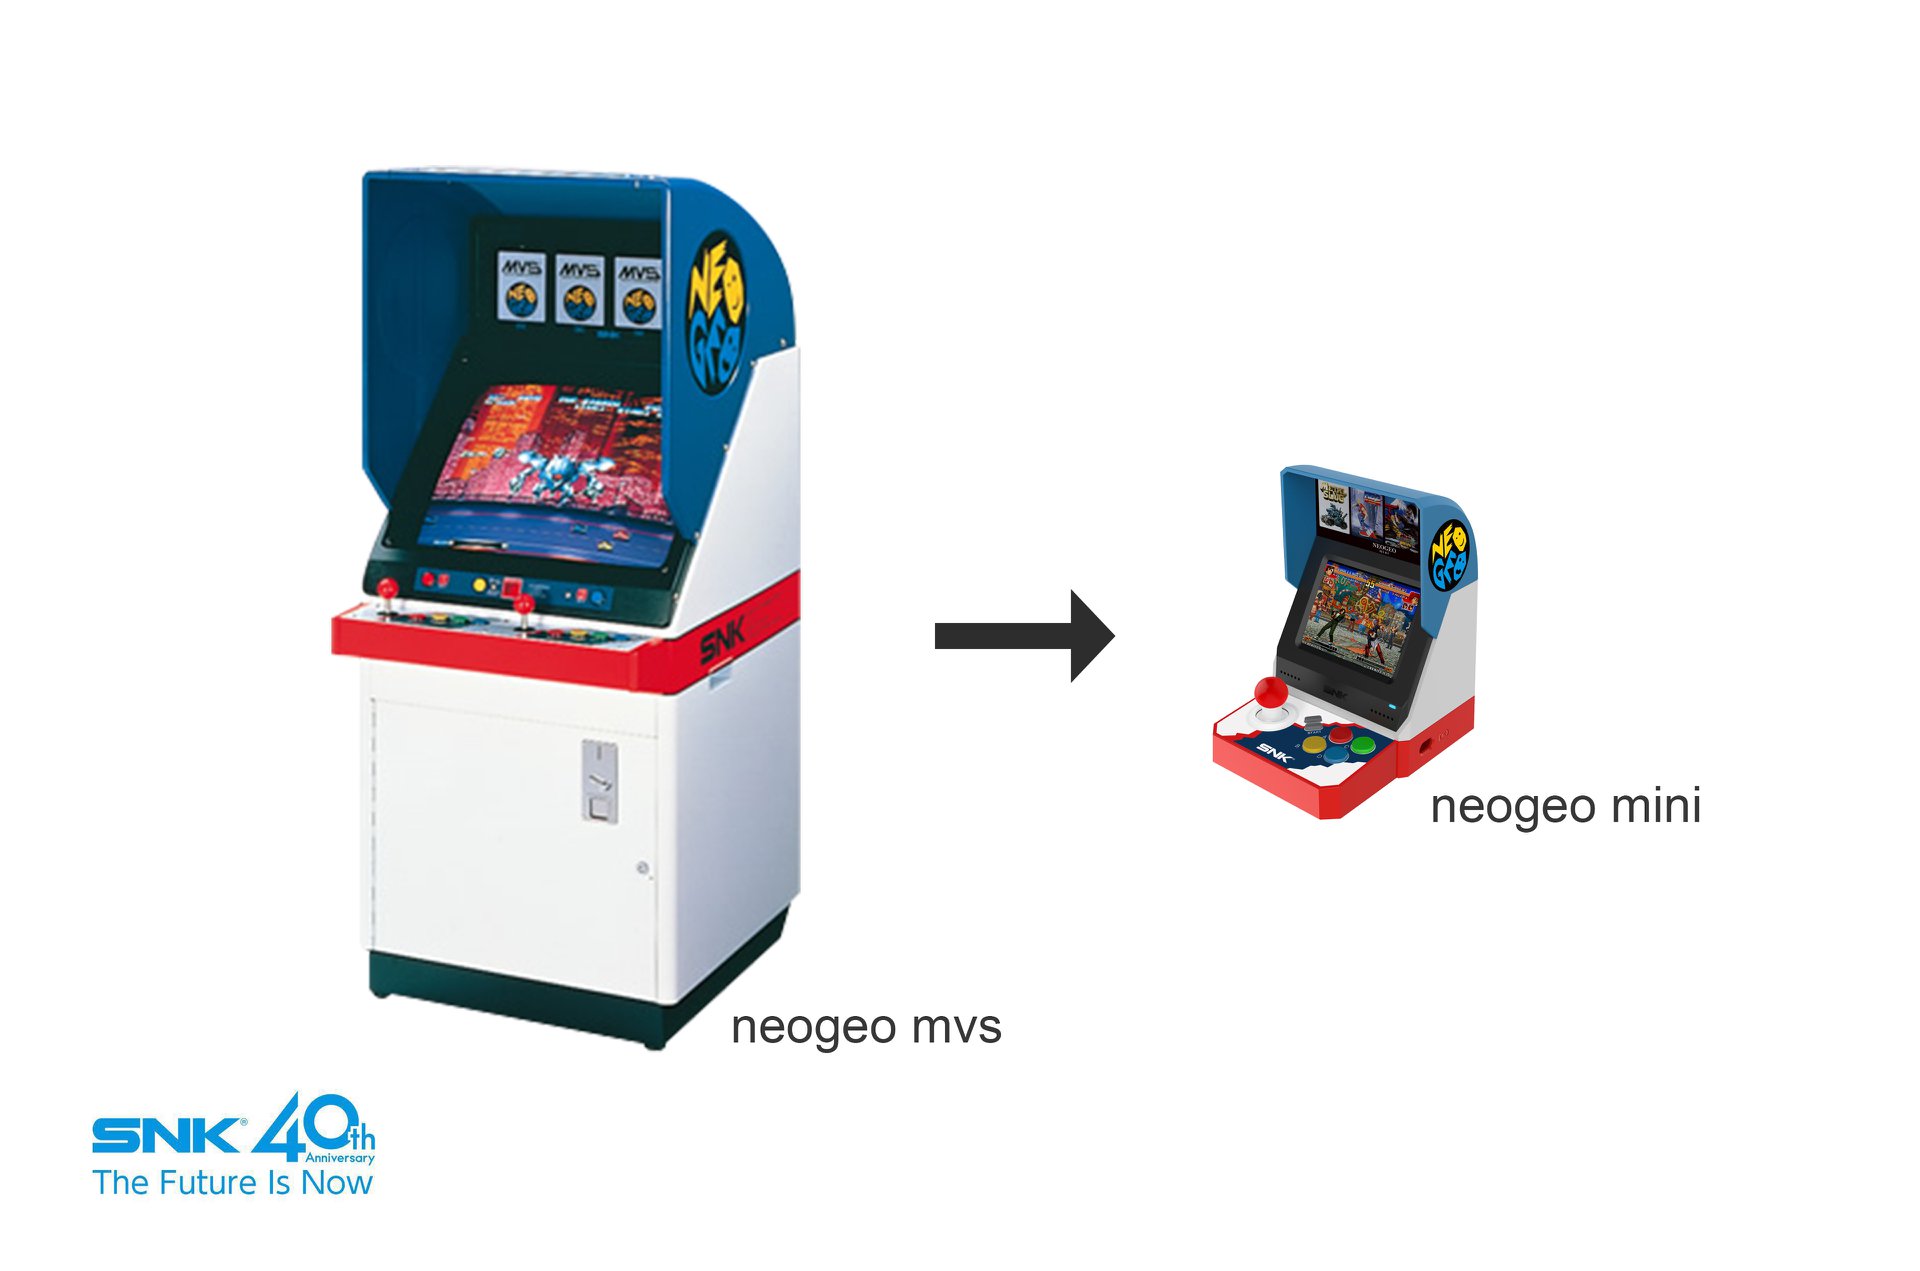 SNK Announces The Neo Geo Mini With 40 Games